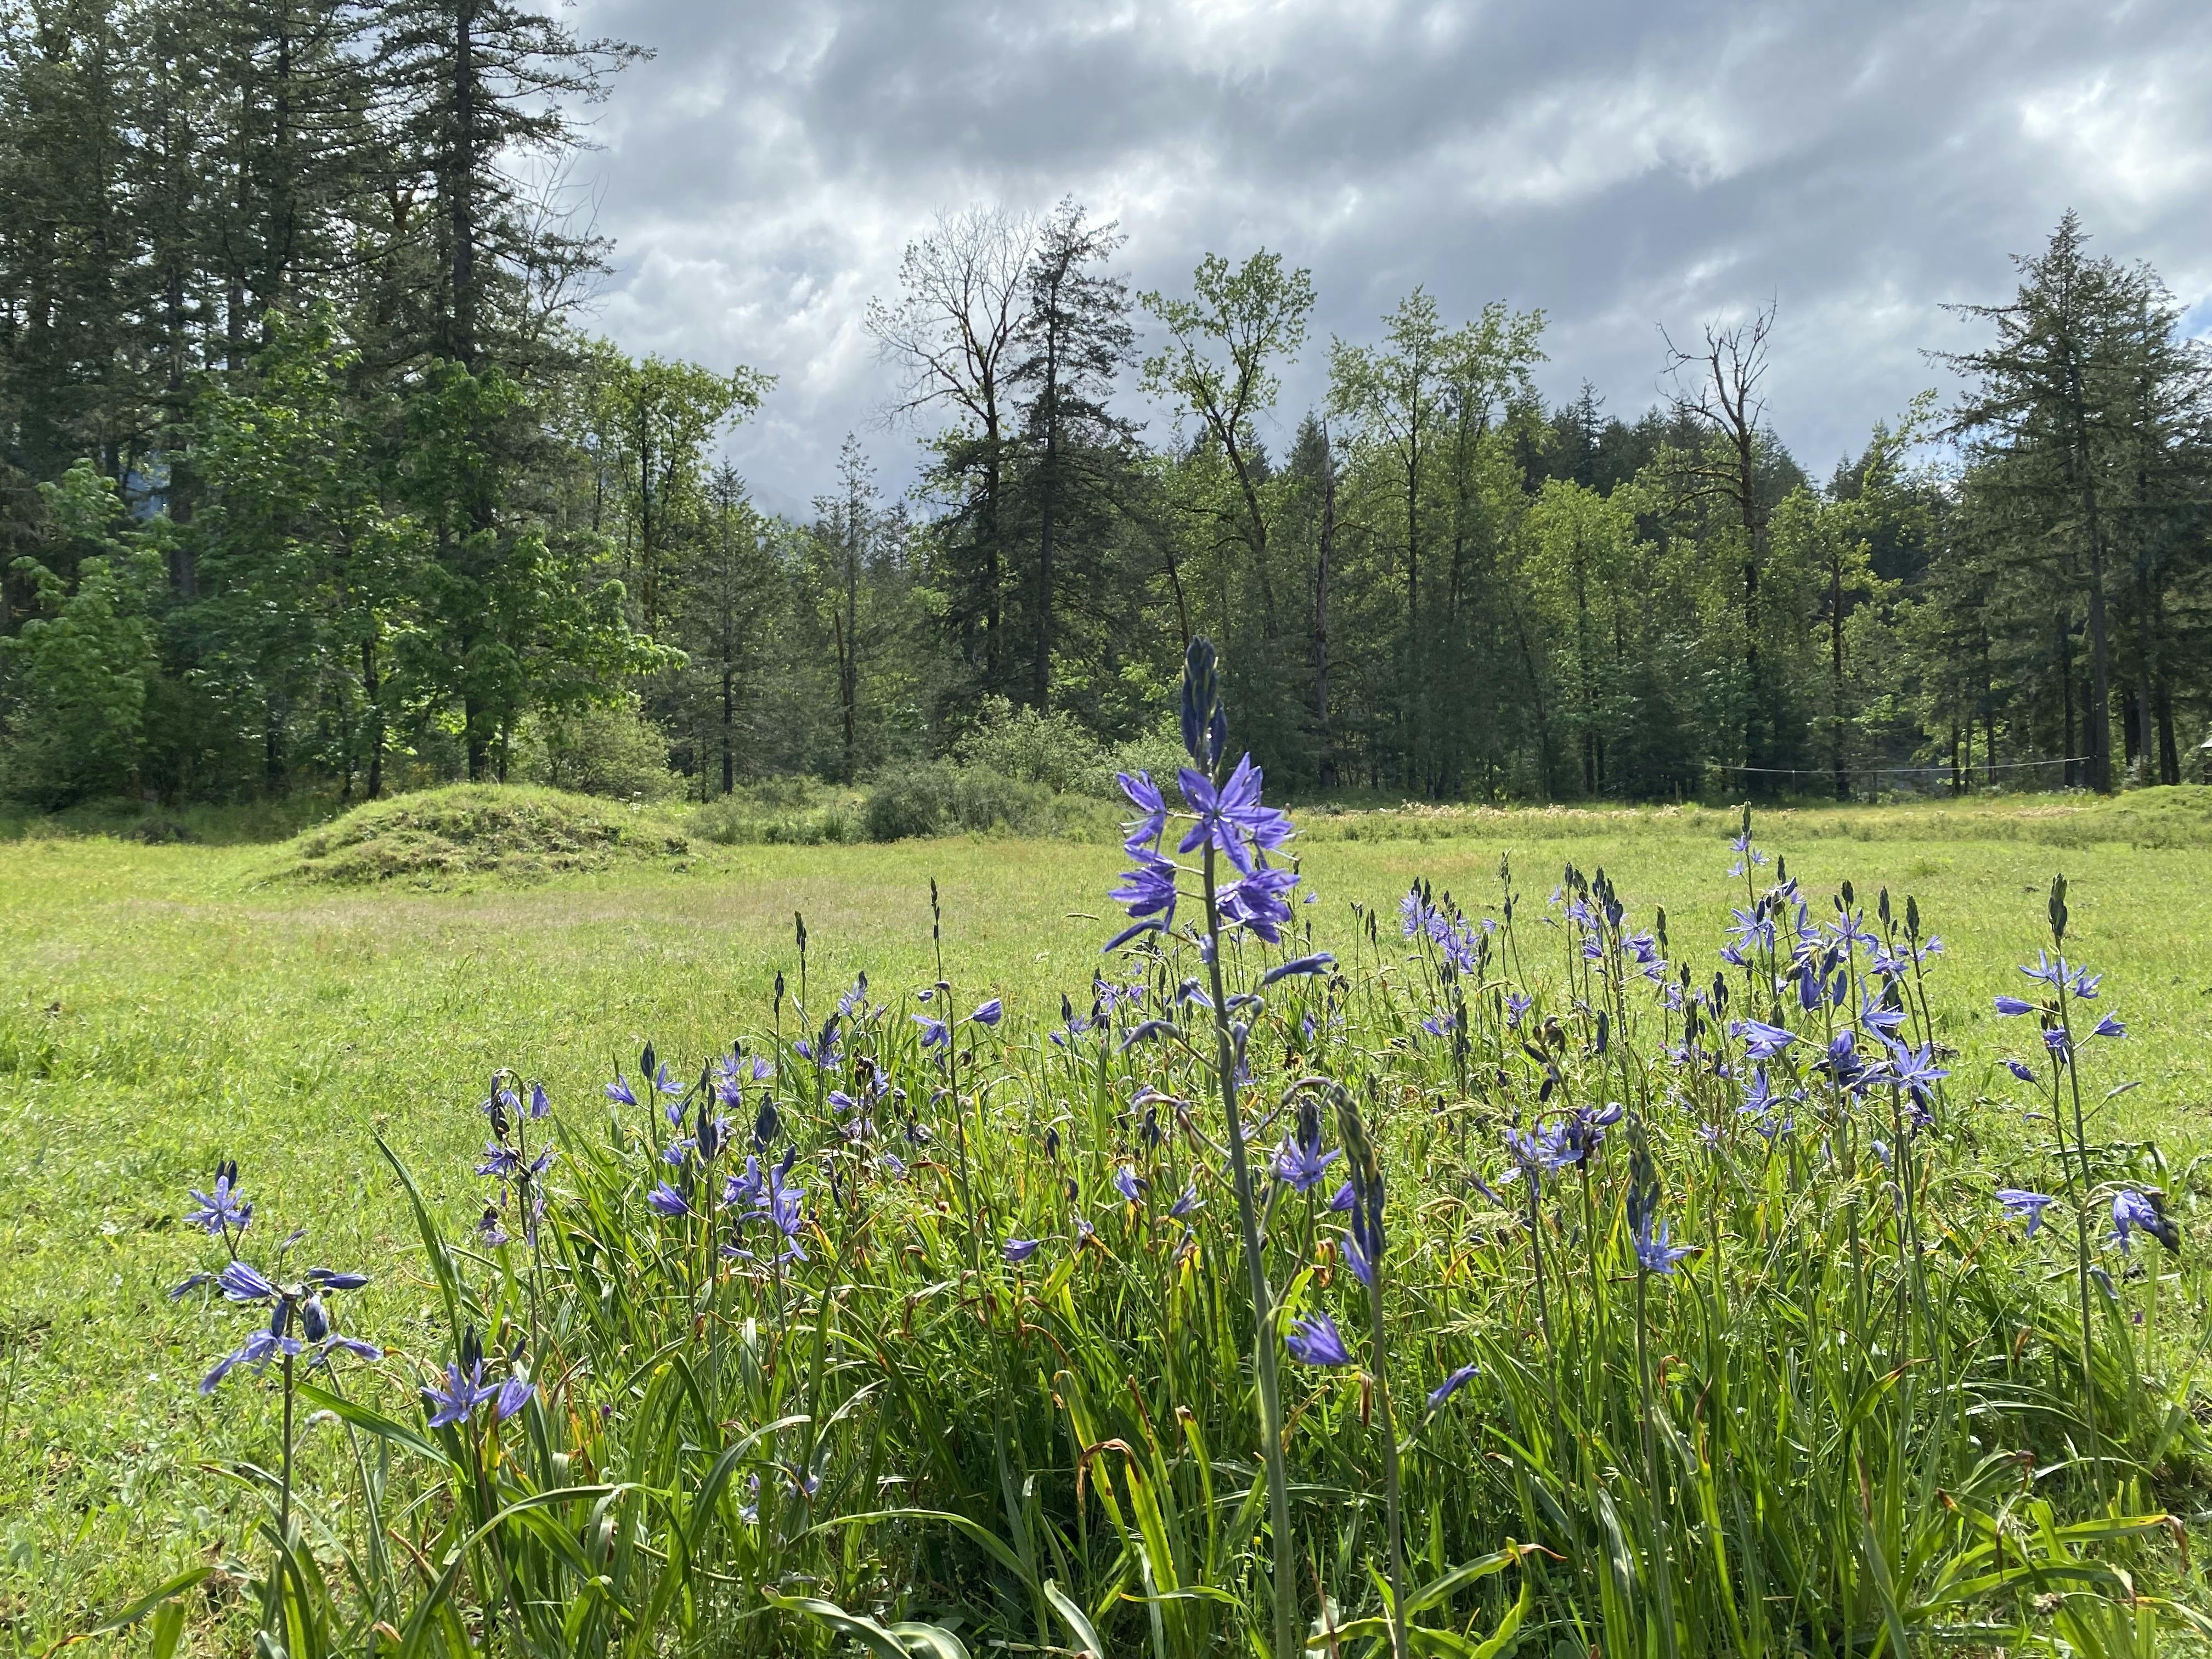 A photo at ground level view of native Camas Lily's purple flowers with the meadow and trees in the background against a moody sky